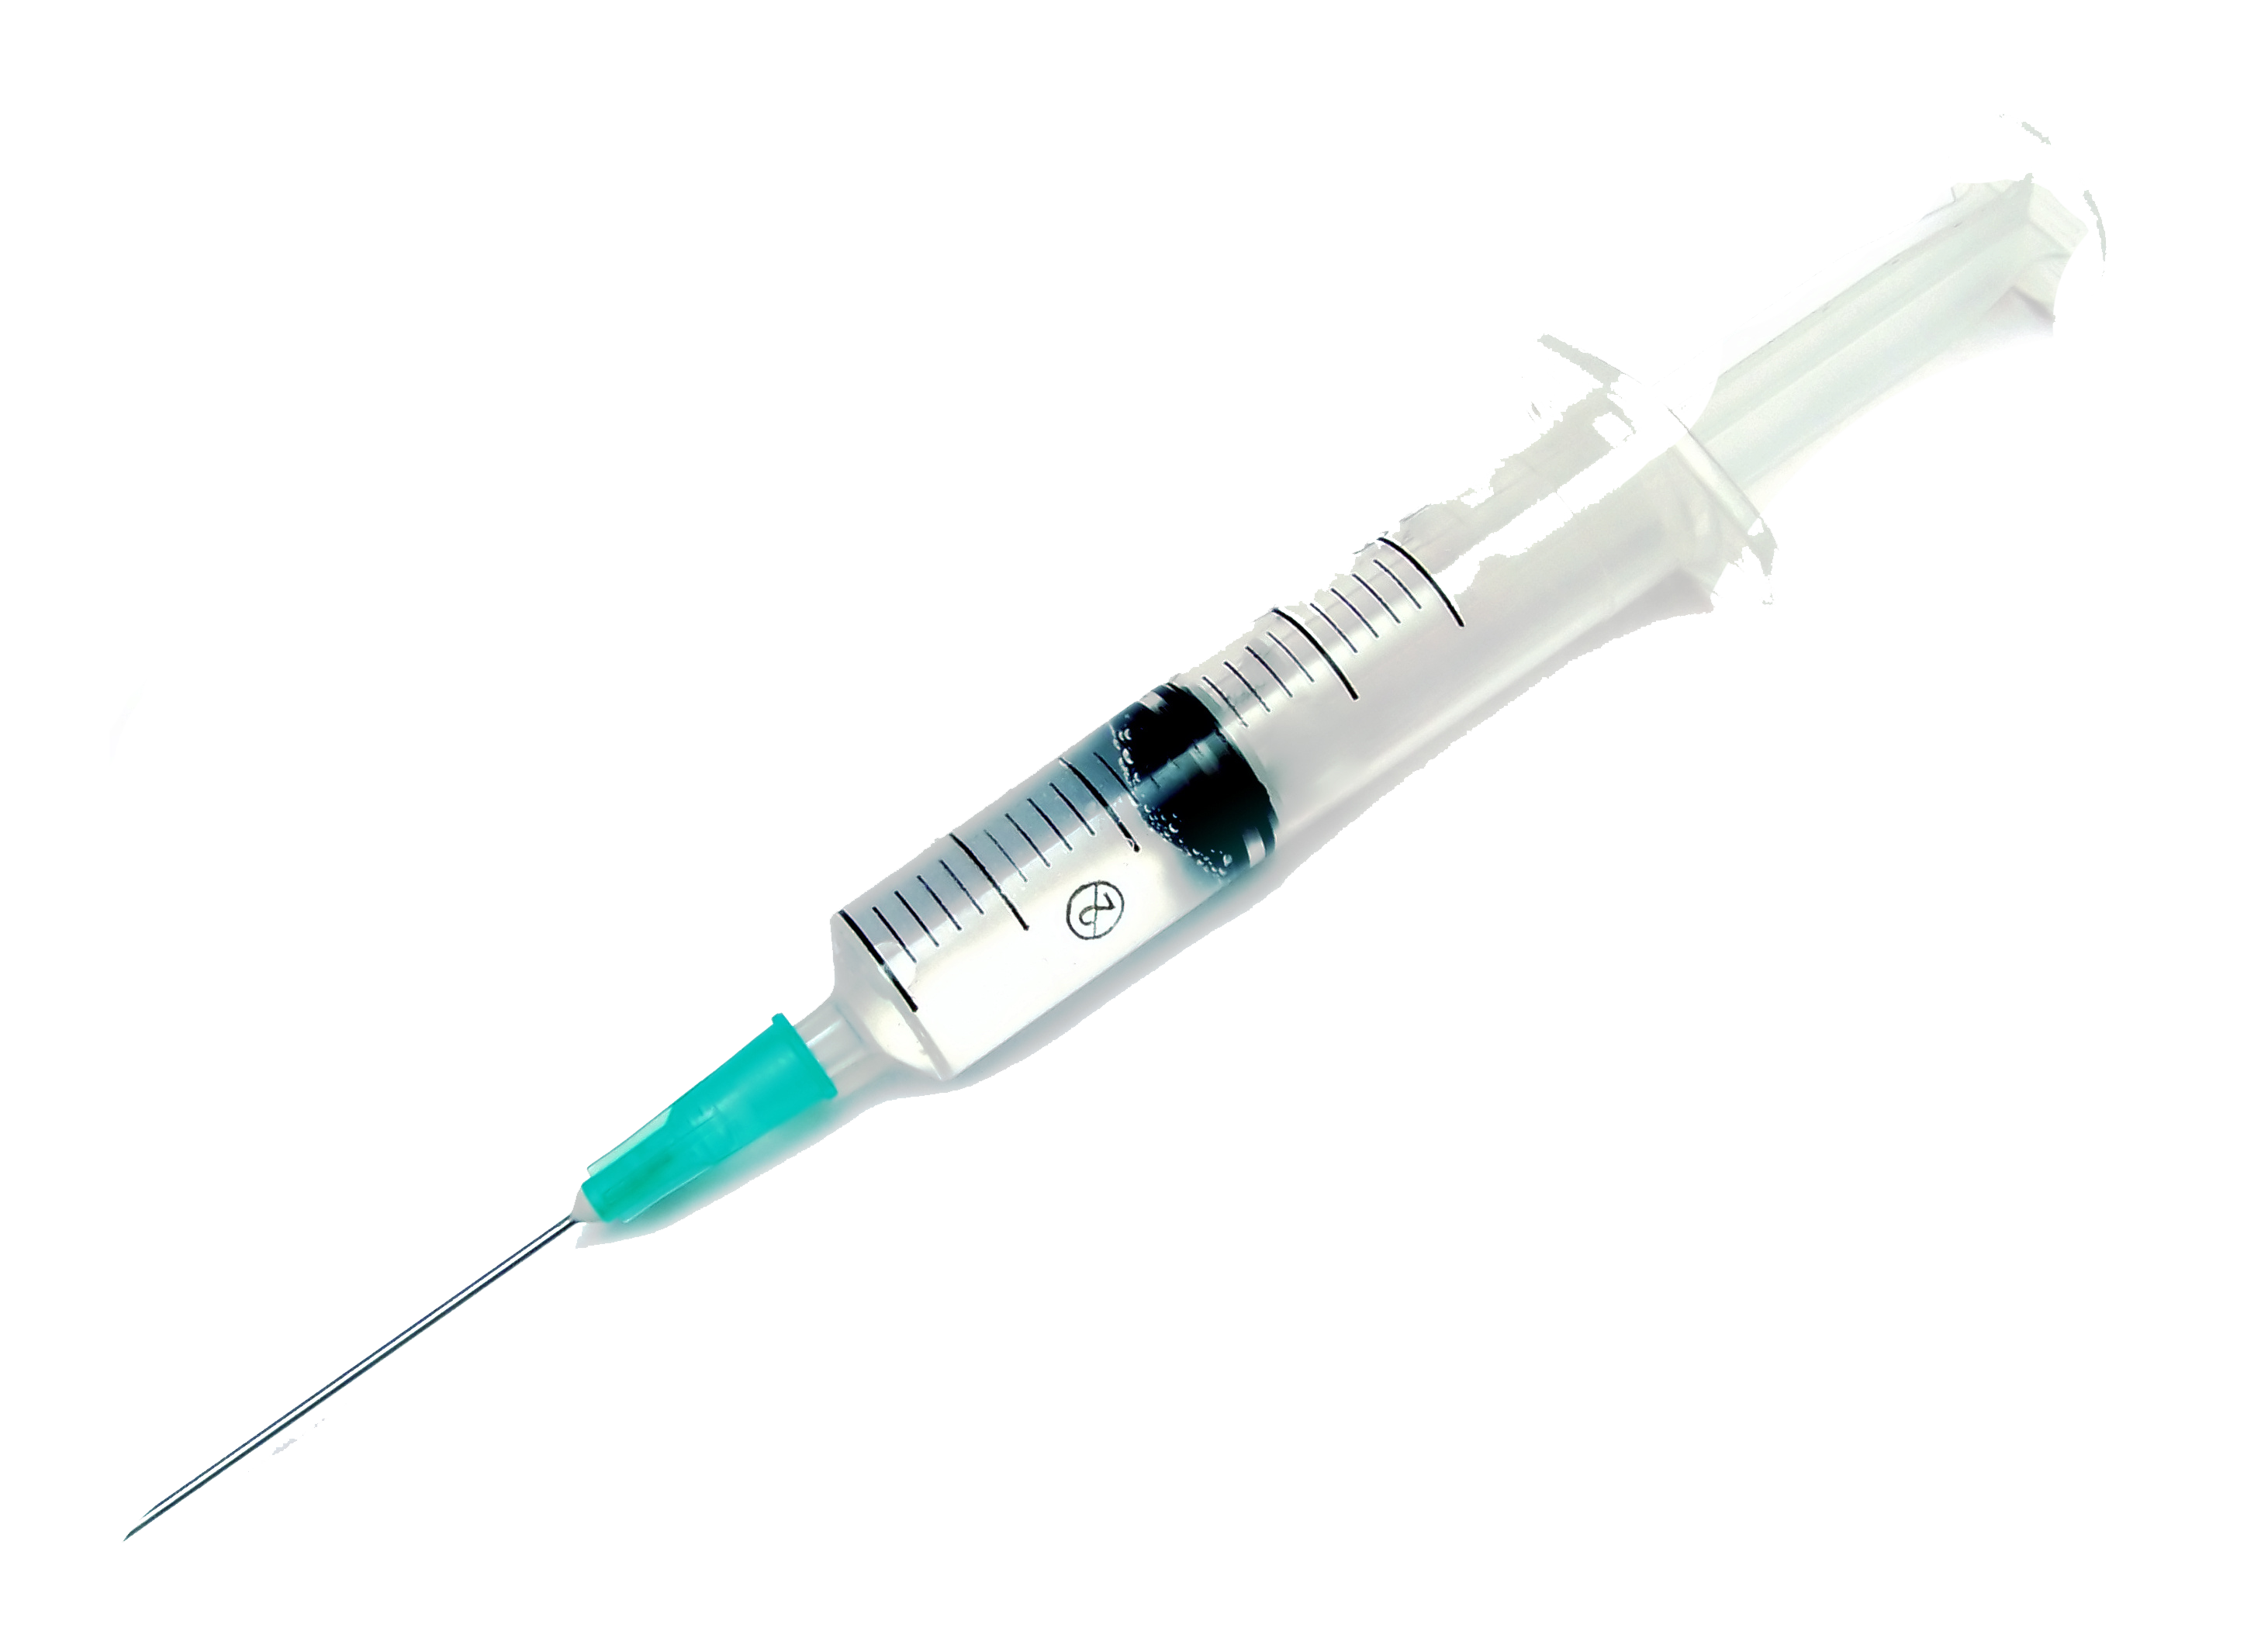 Taper Needle Medicine Luer Syringe Hypodermic Injection Clipart